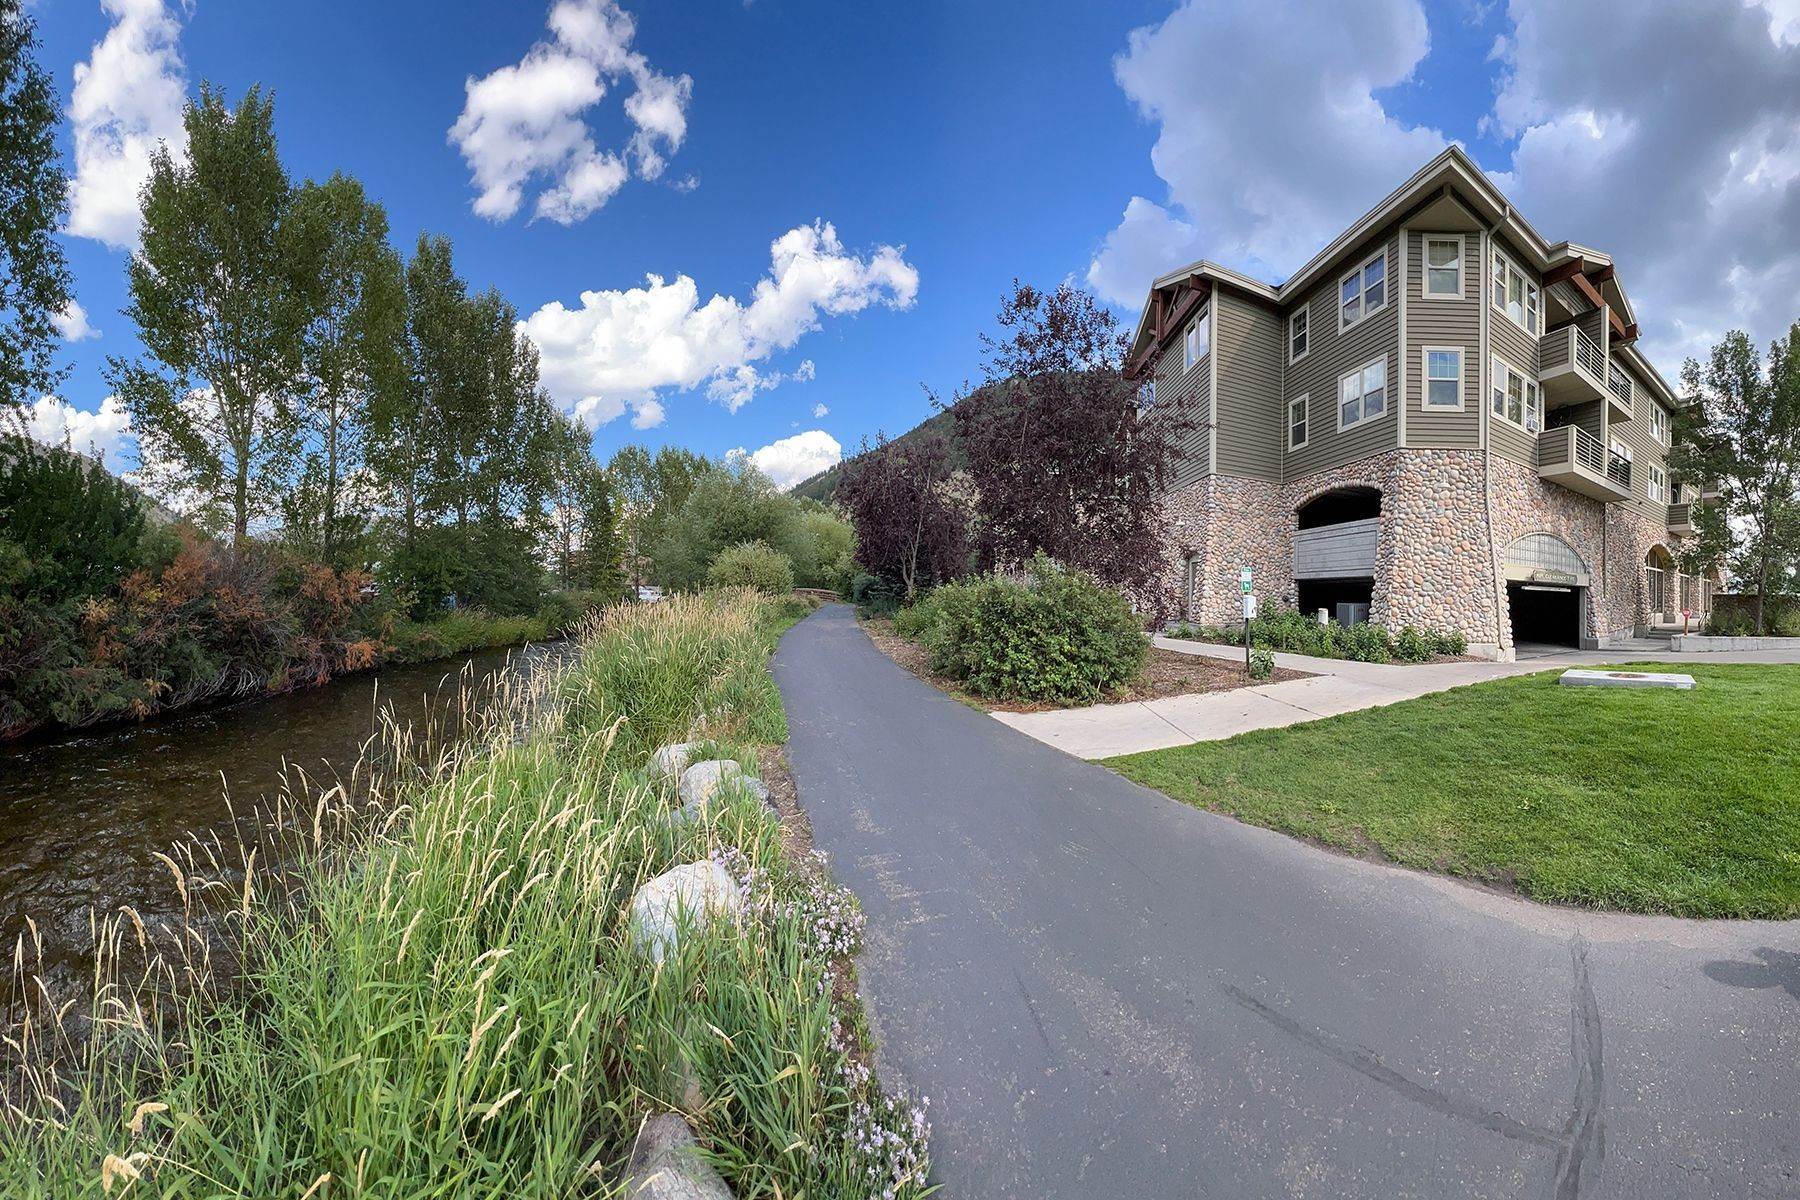 Condominiums for Sale at Spacious Condo Overlooking Flat Creek 1325 S Highway 89, #318 Jackson, Wyoming 83001 United States